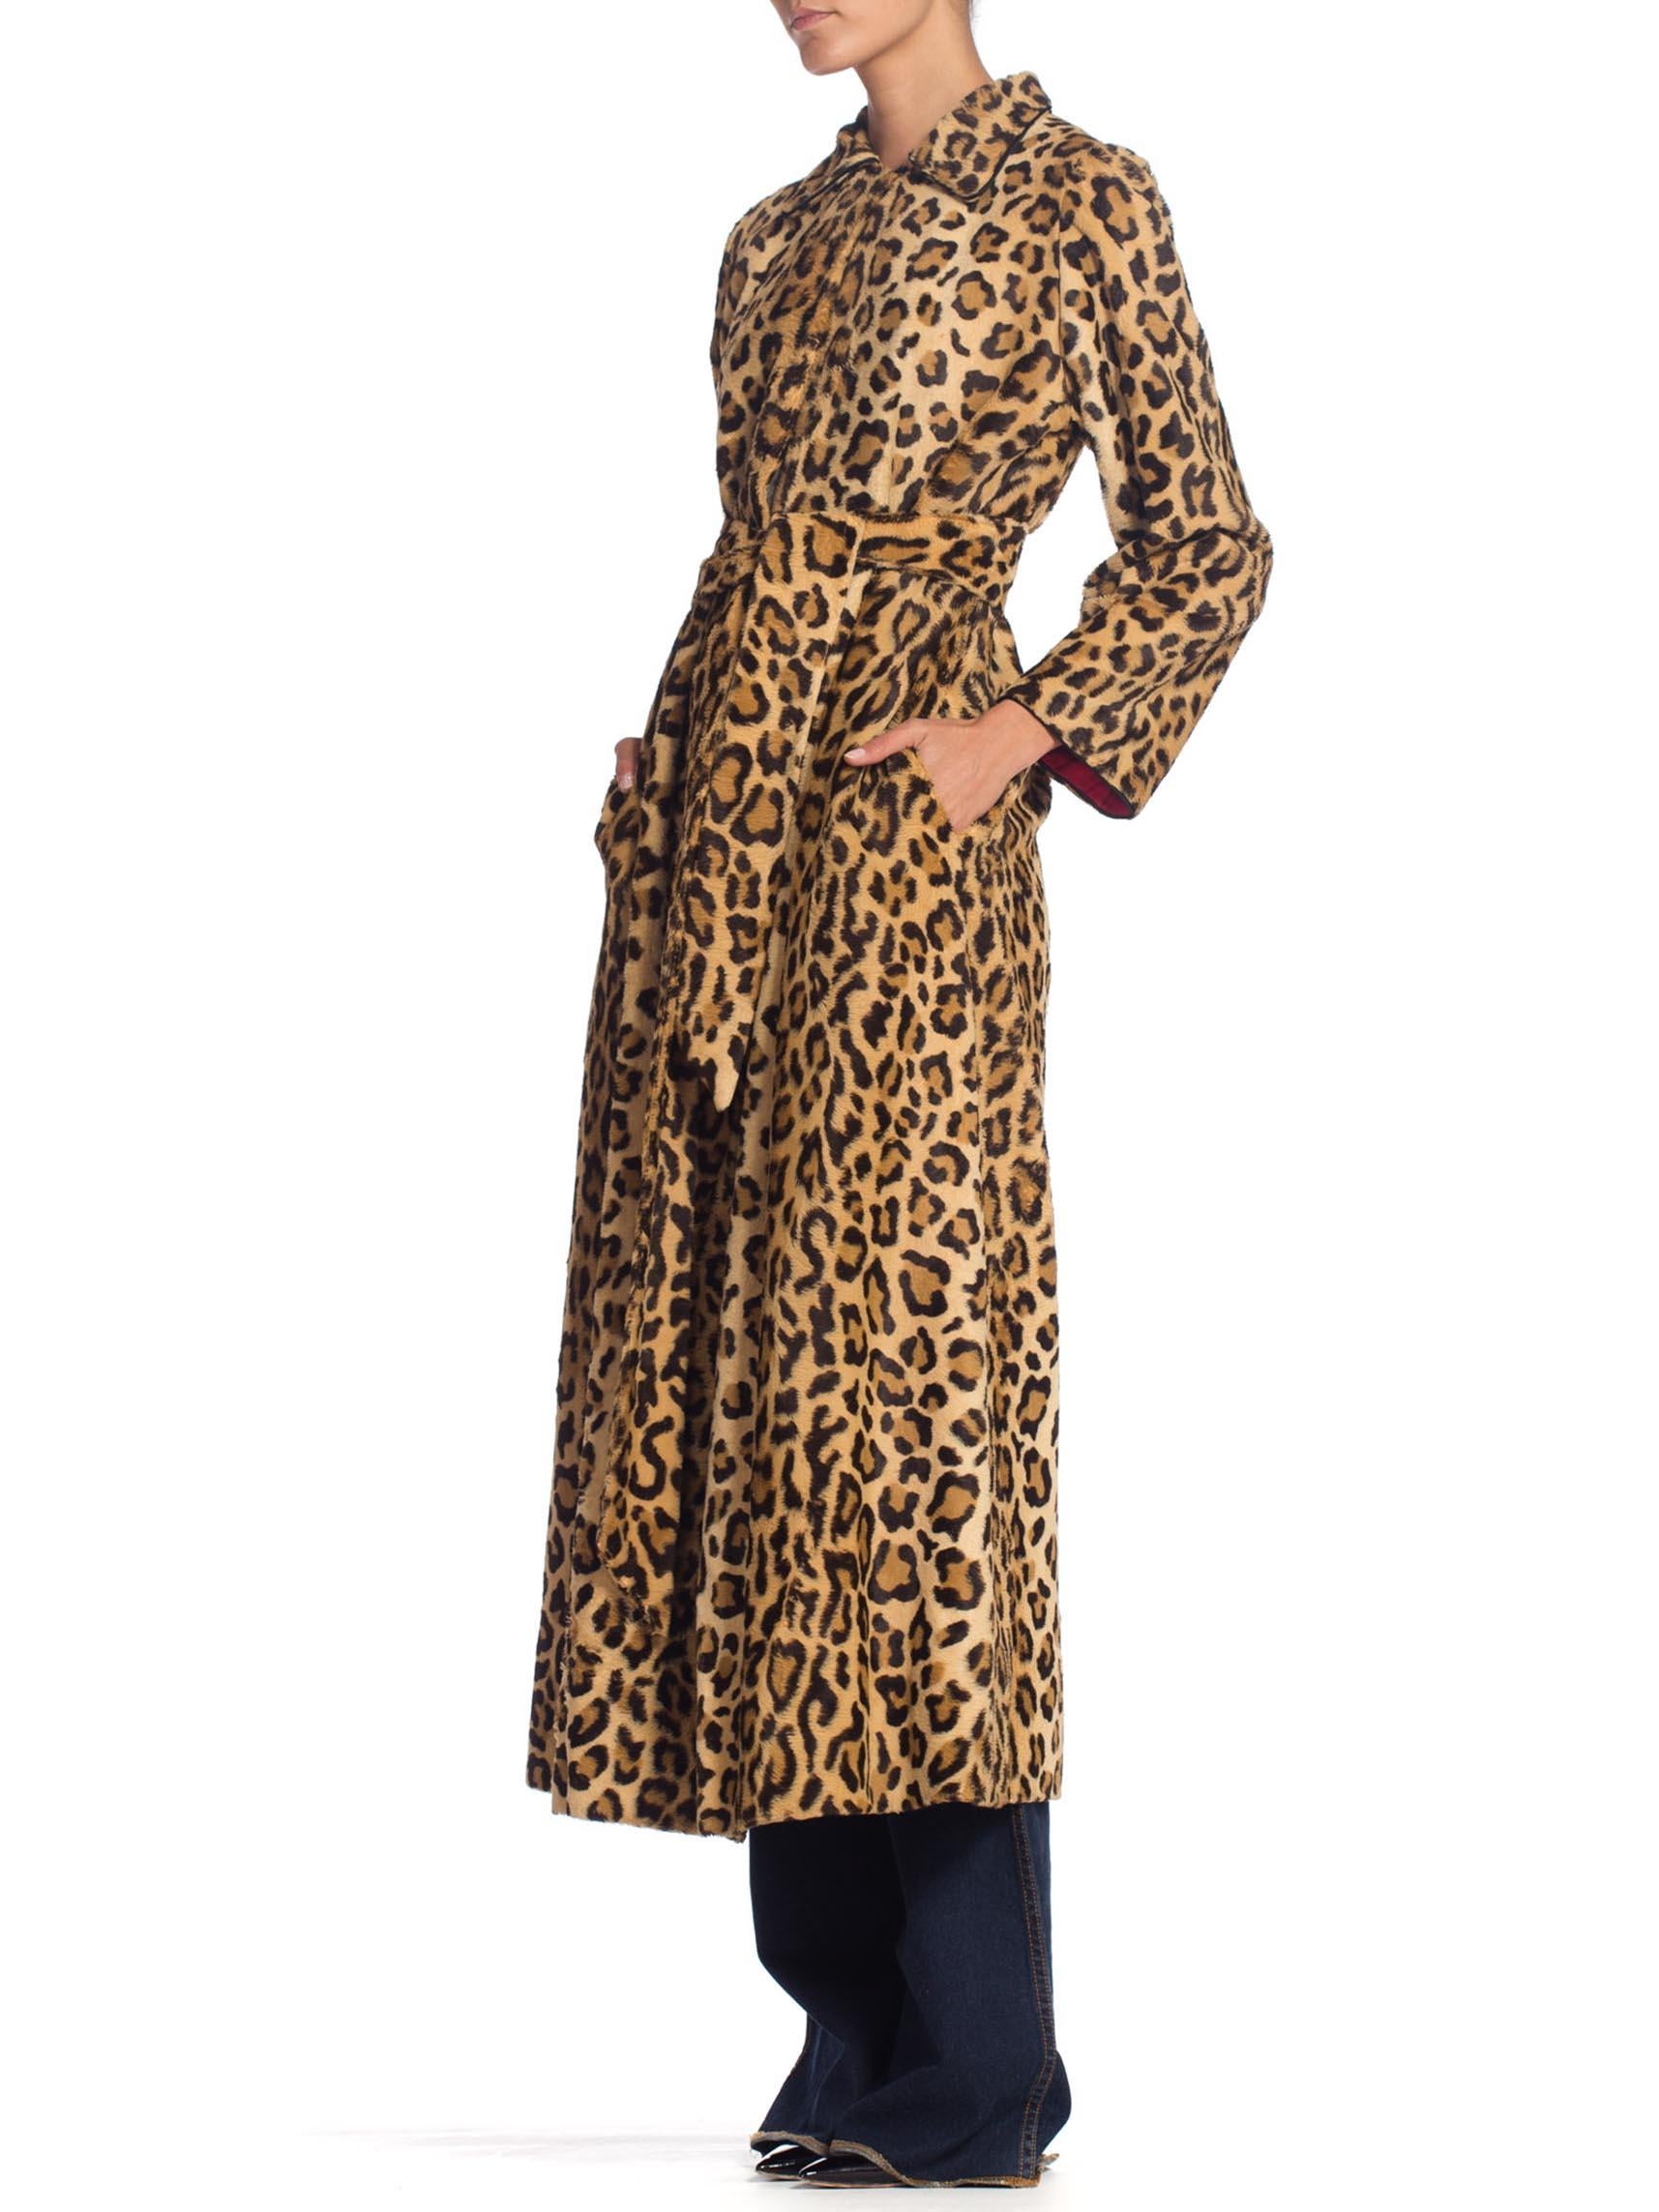 1940'S Juel Park Beverly Hills Couture Faux Leopard Velvet Coat Lined In Red Silk